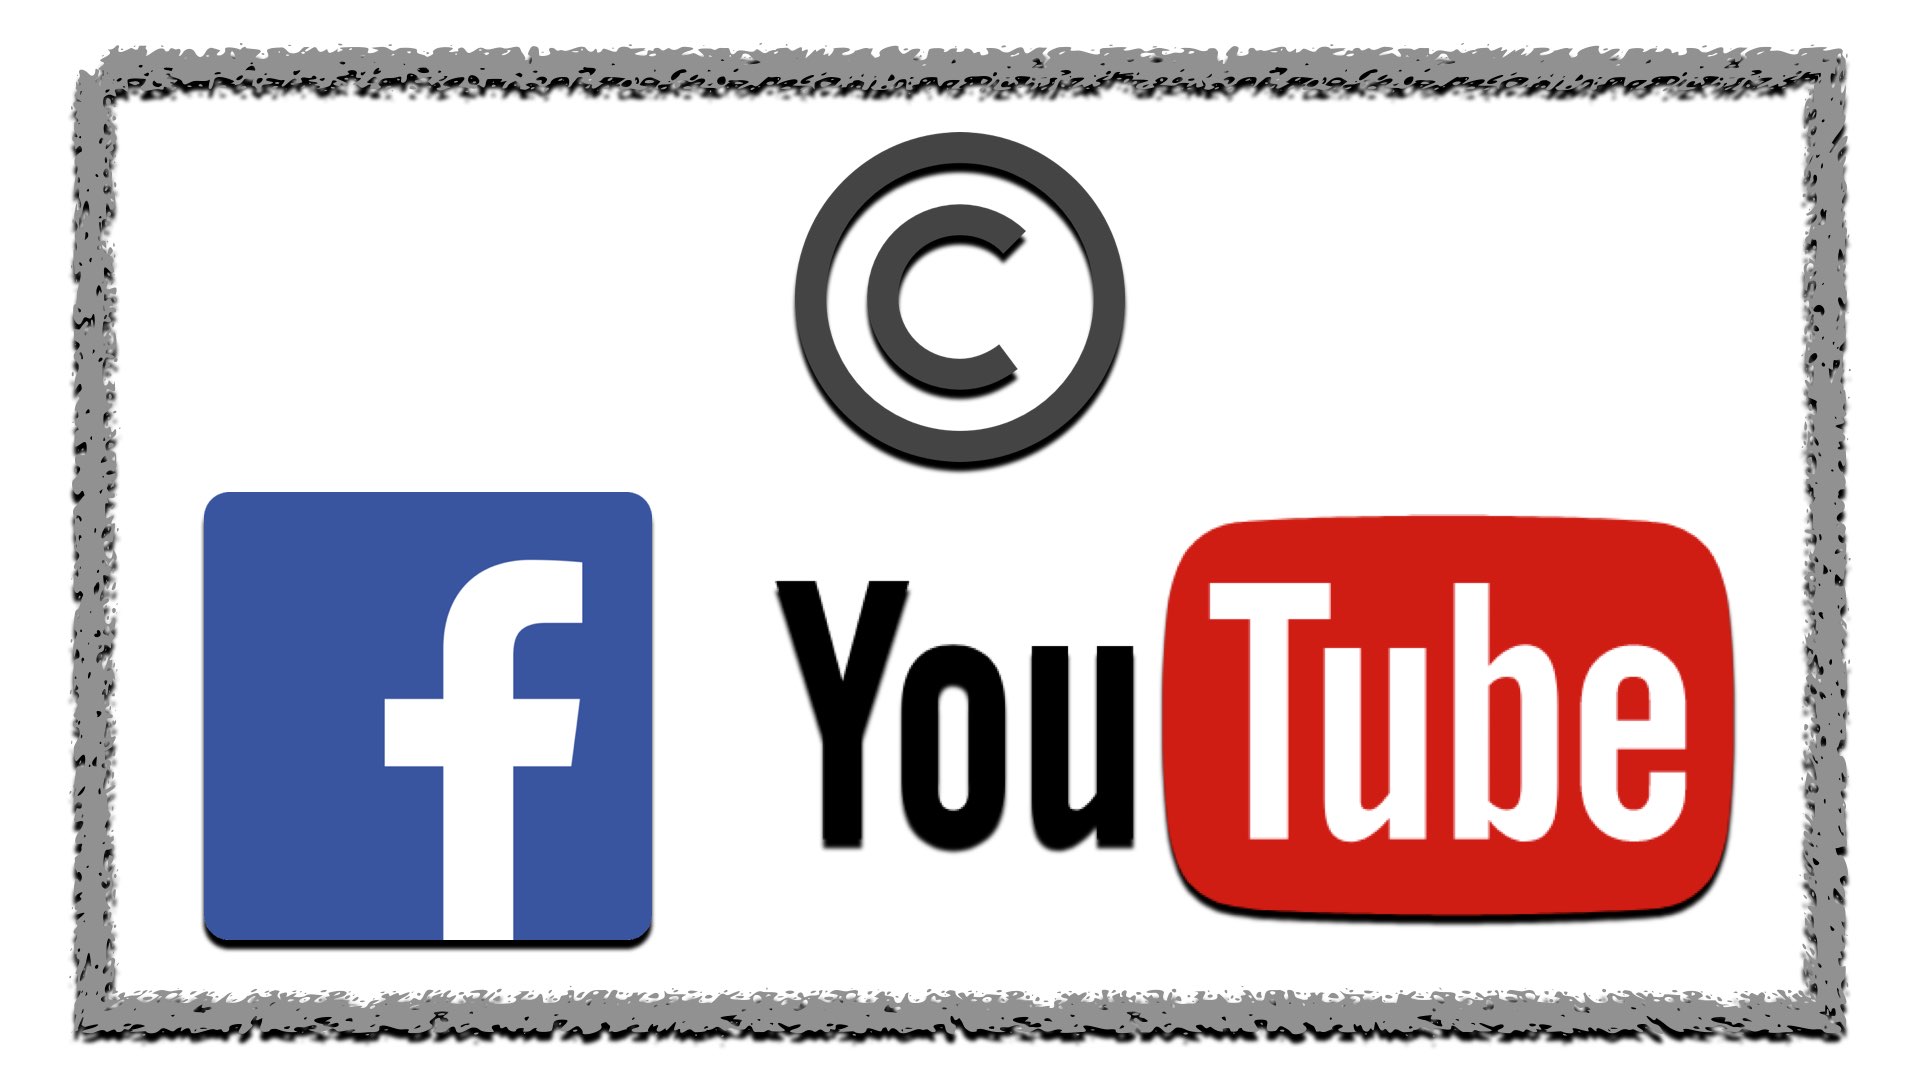 Facebook and Youtube - copyright infringement